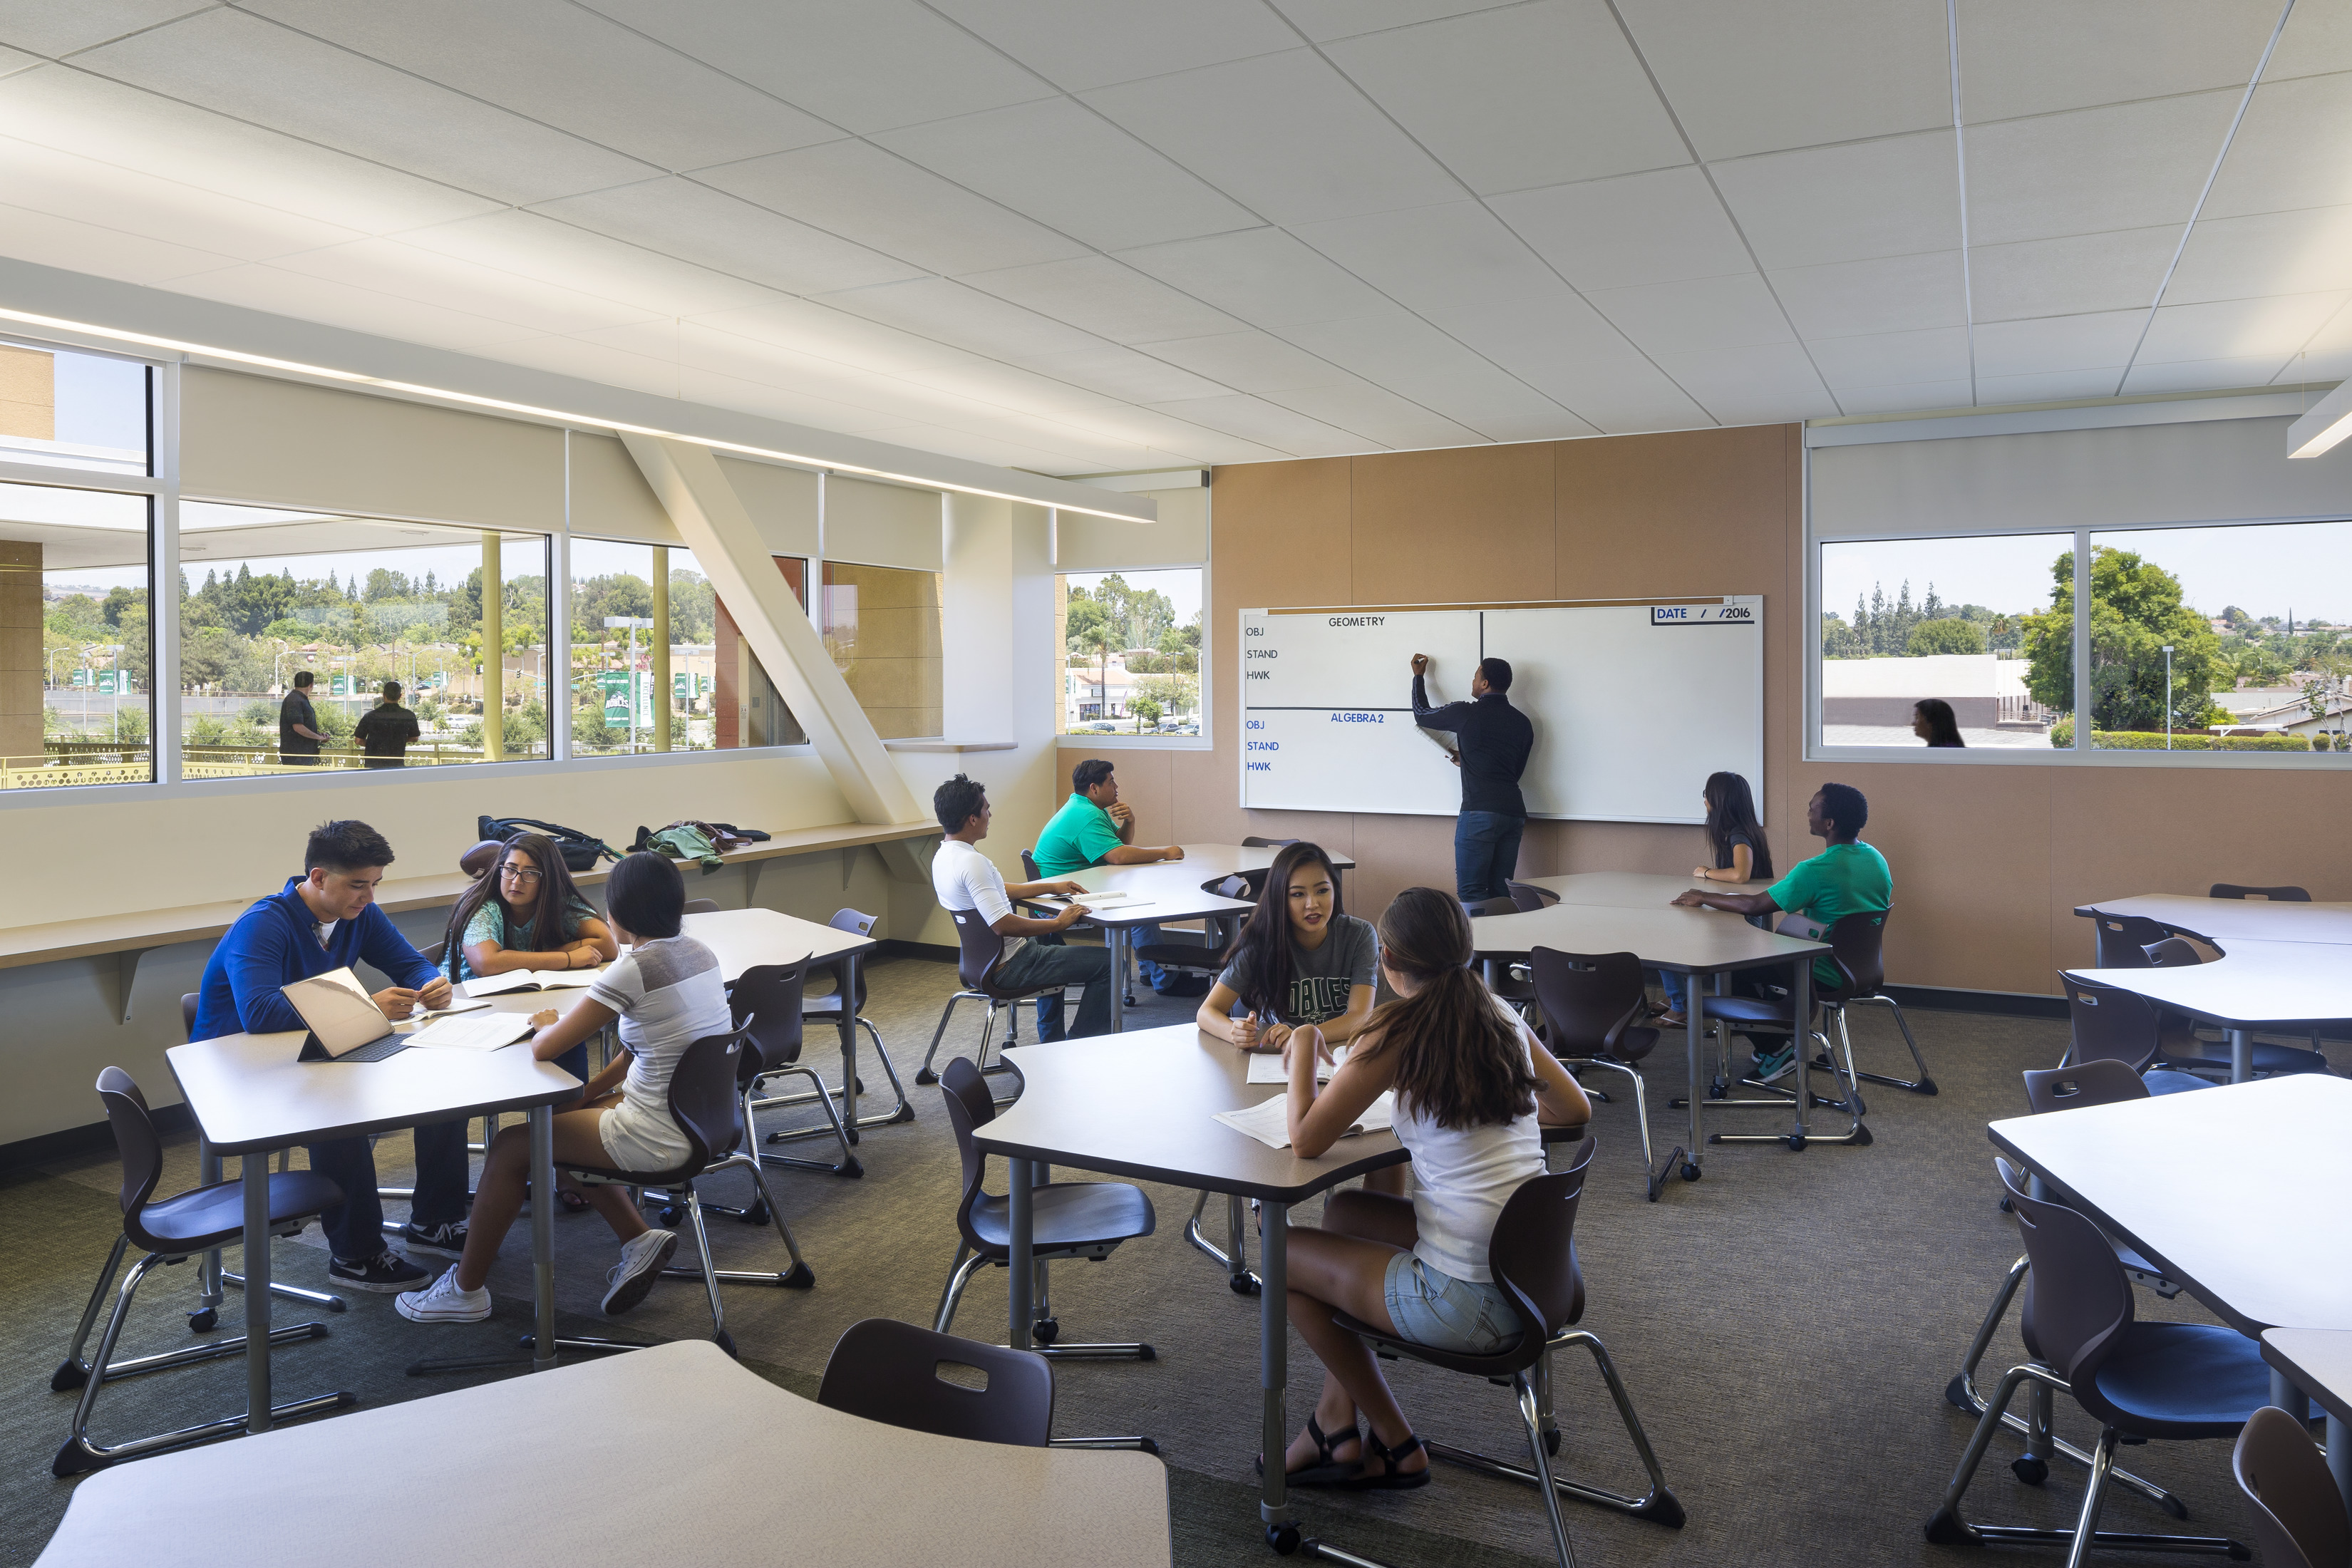 Schools rely on creative concepts of interior design to better the student experience.